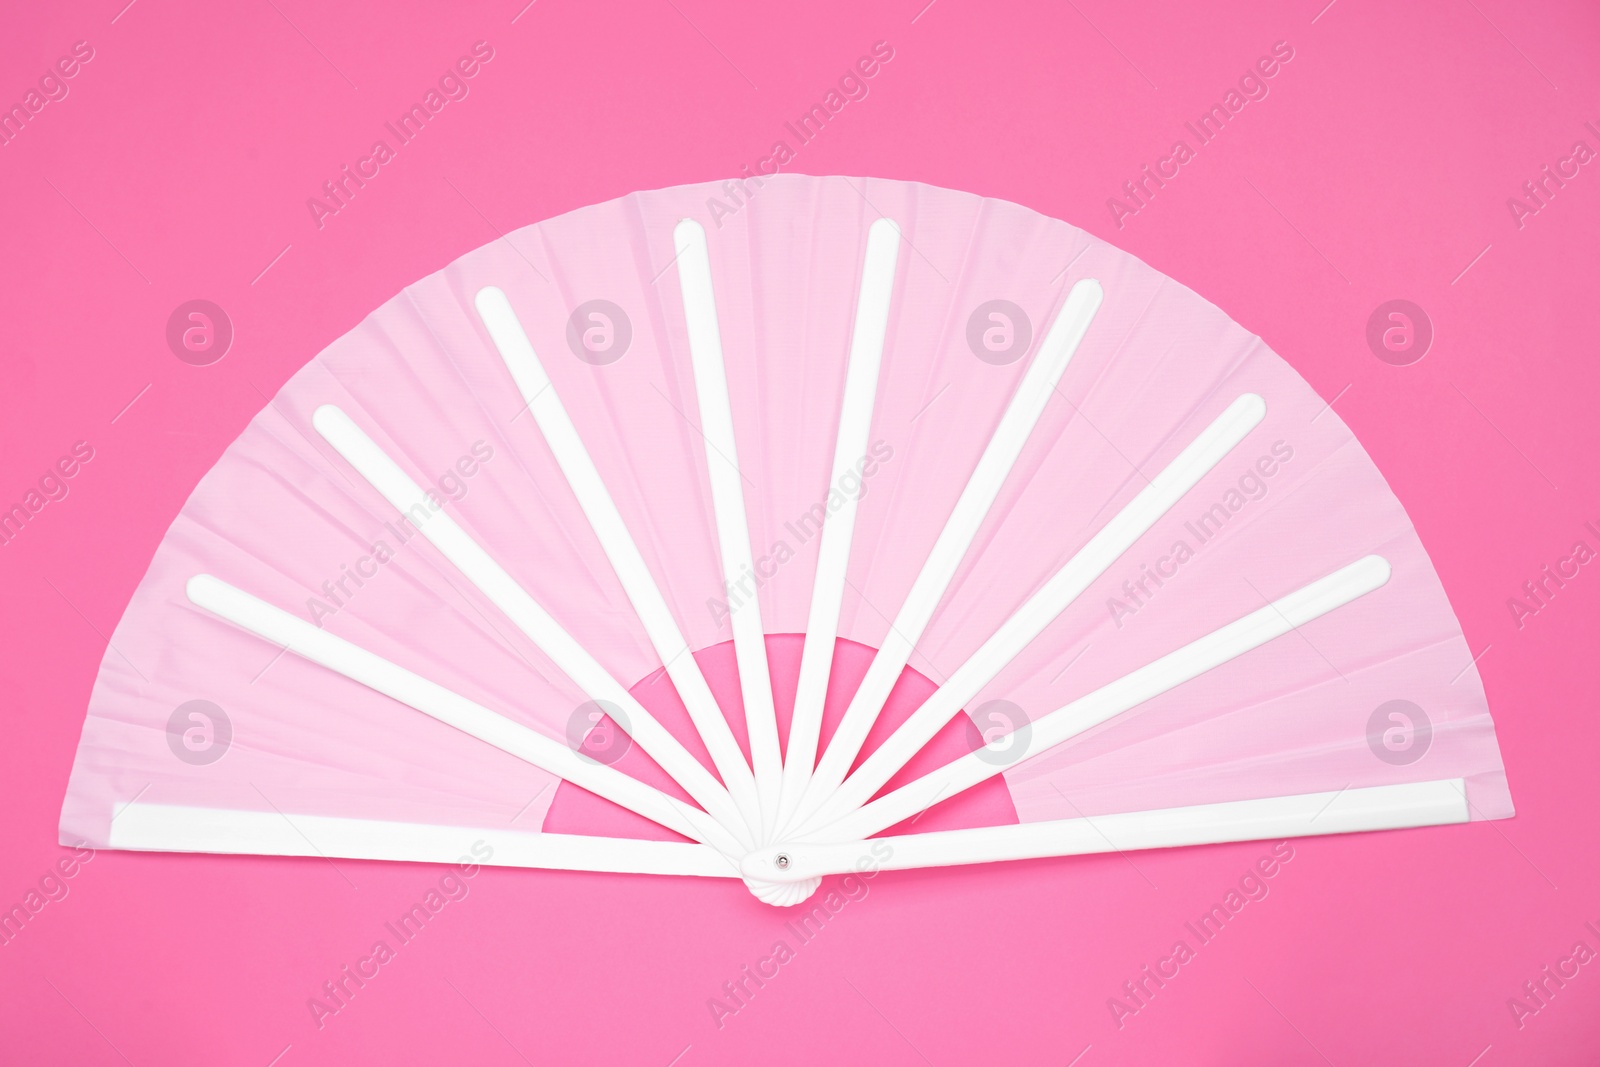 Photo of Stylish white hand fan on pink background, top view